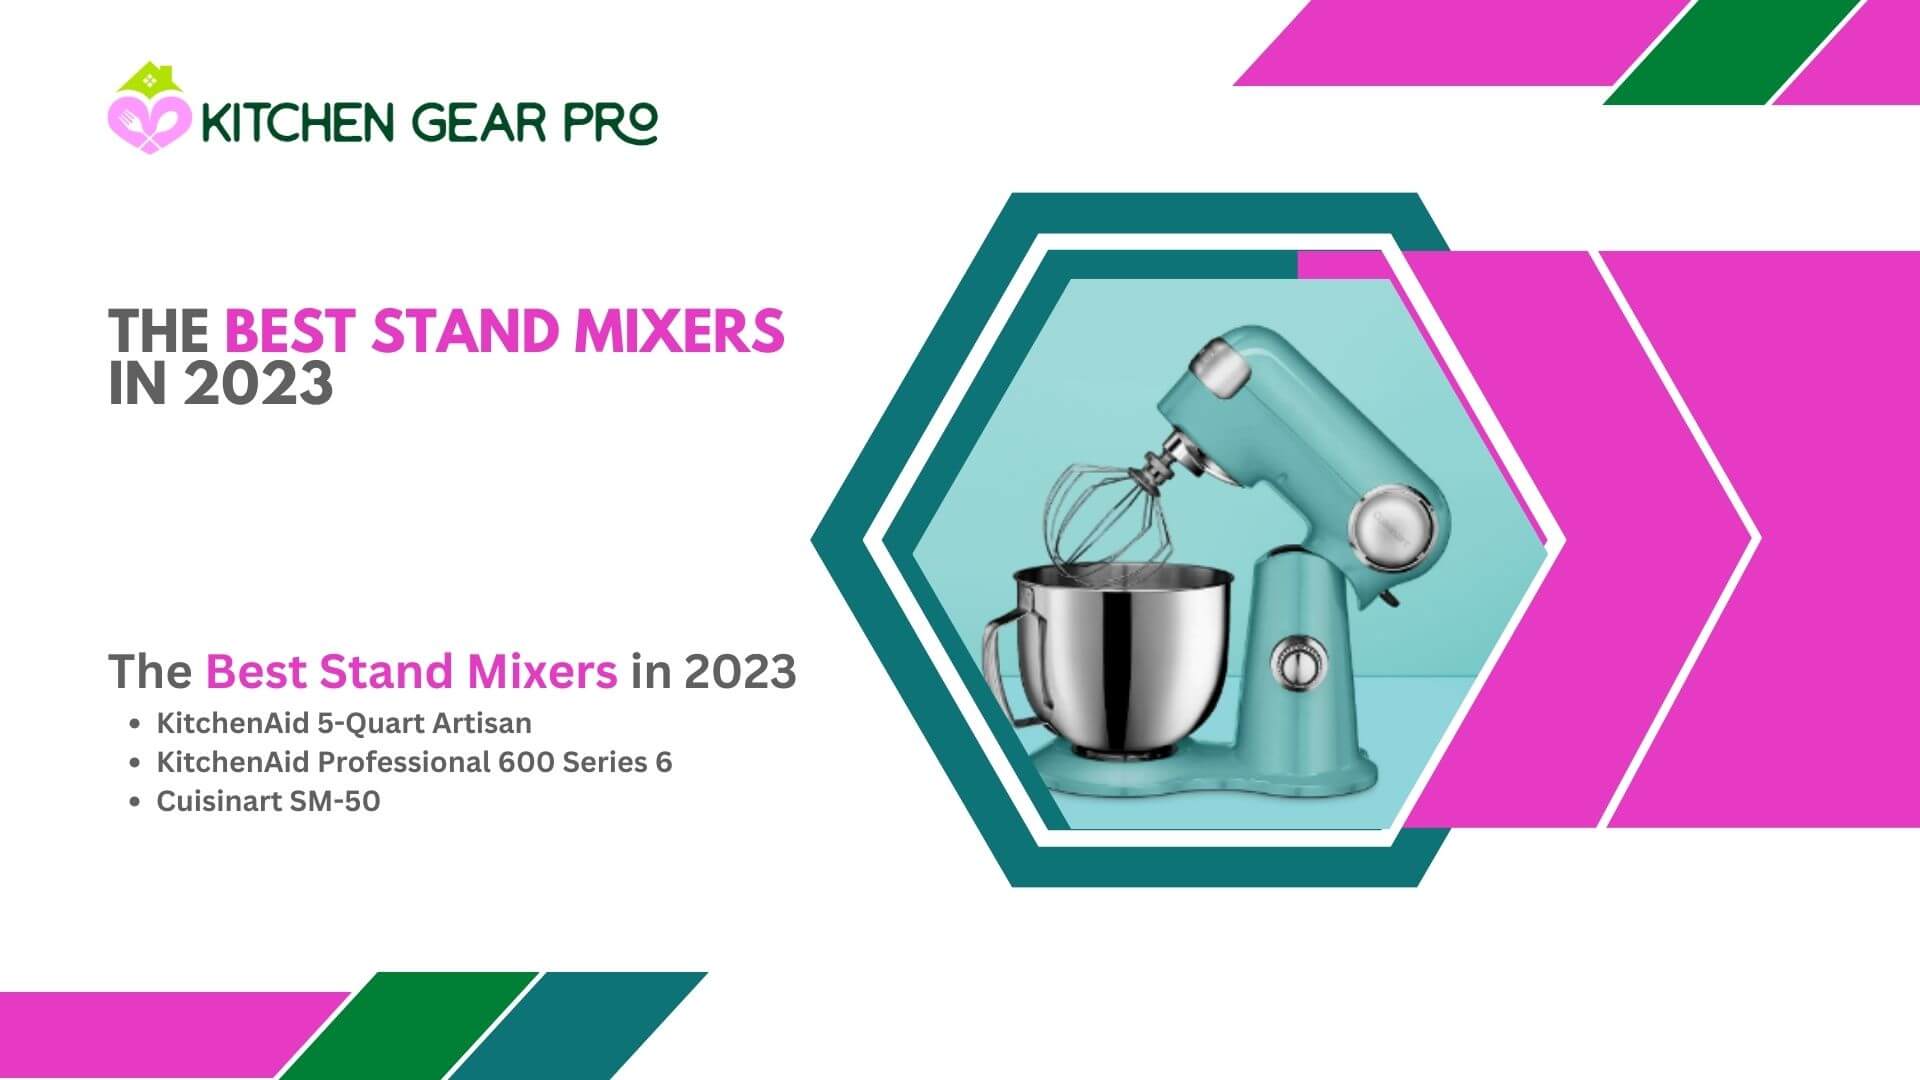 The Best Stand Mixers in 2023: What You Need To Know